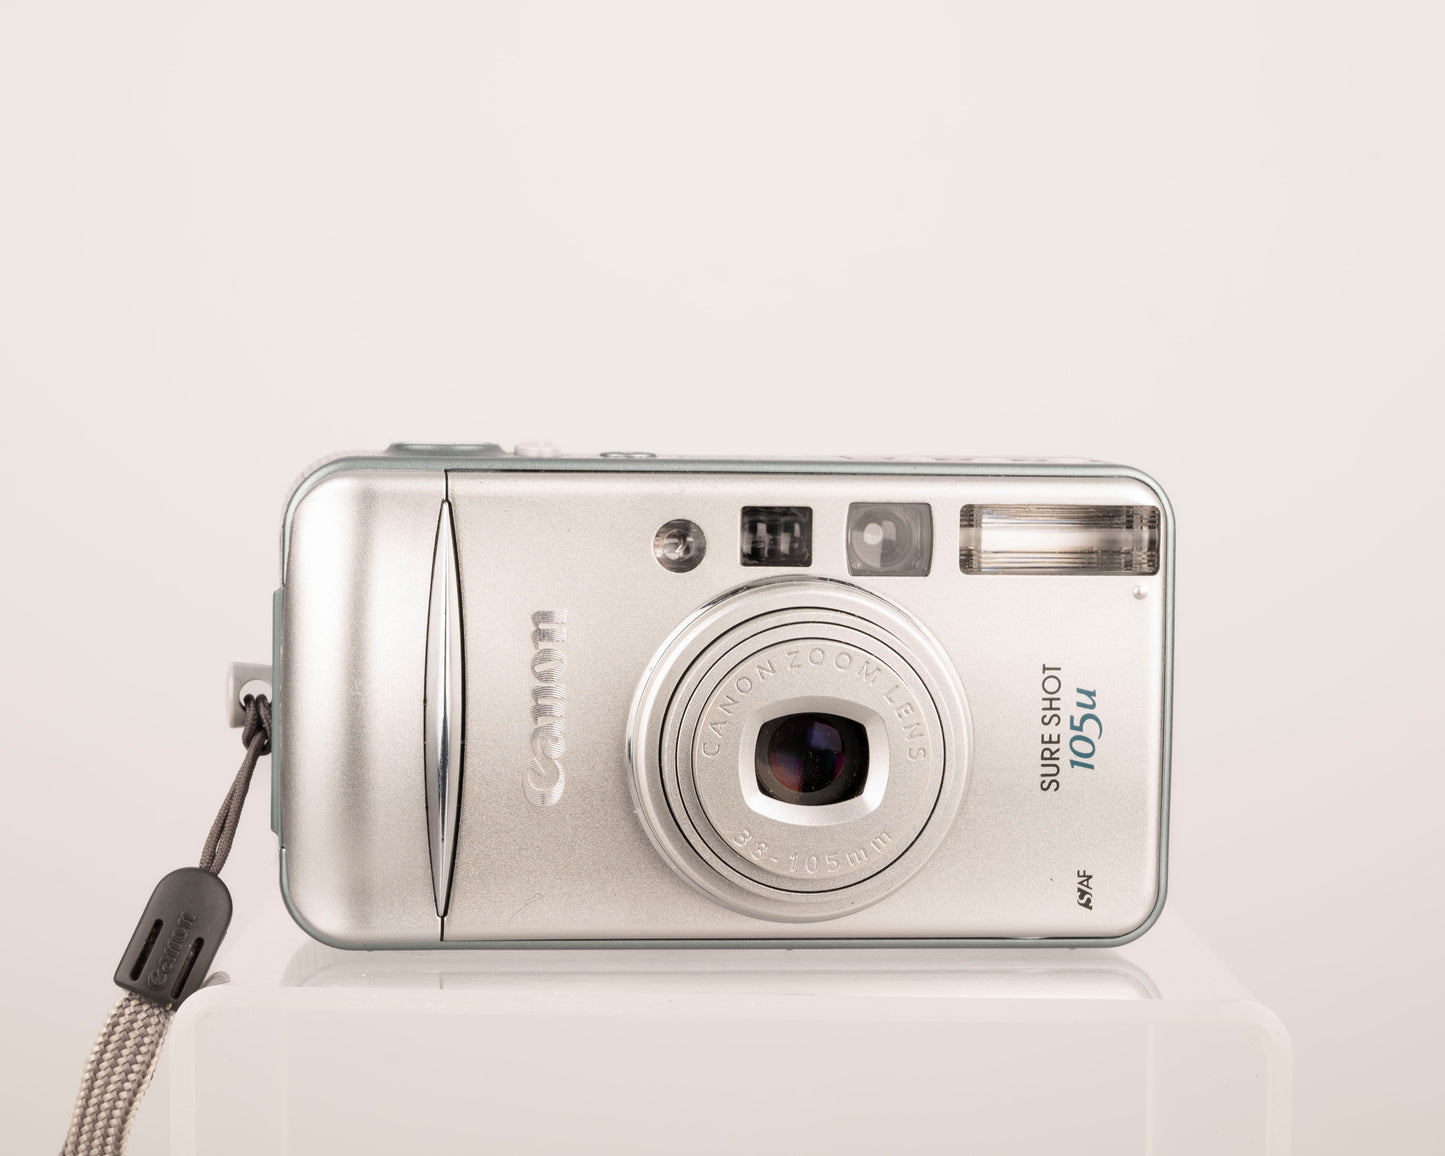 The Canon Sure Shot 105u ultra-compact 35mm point-and-shoot camera